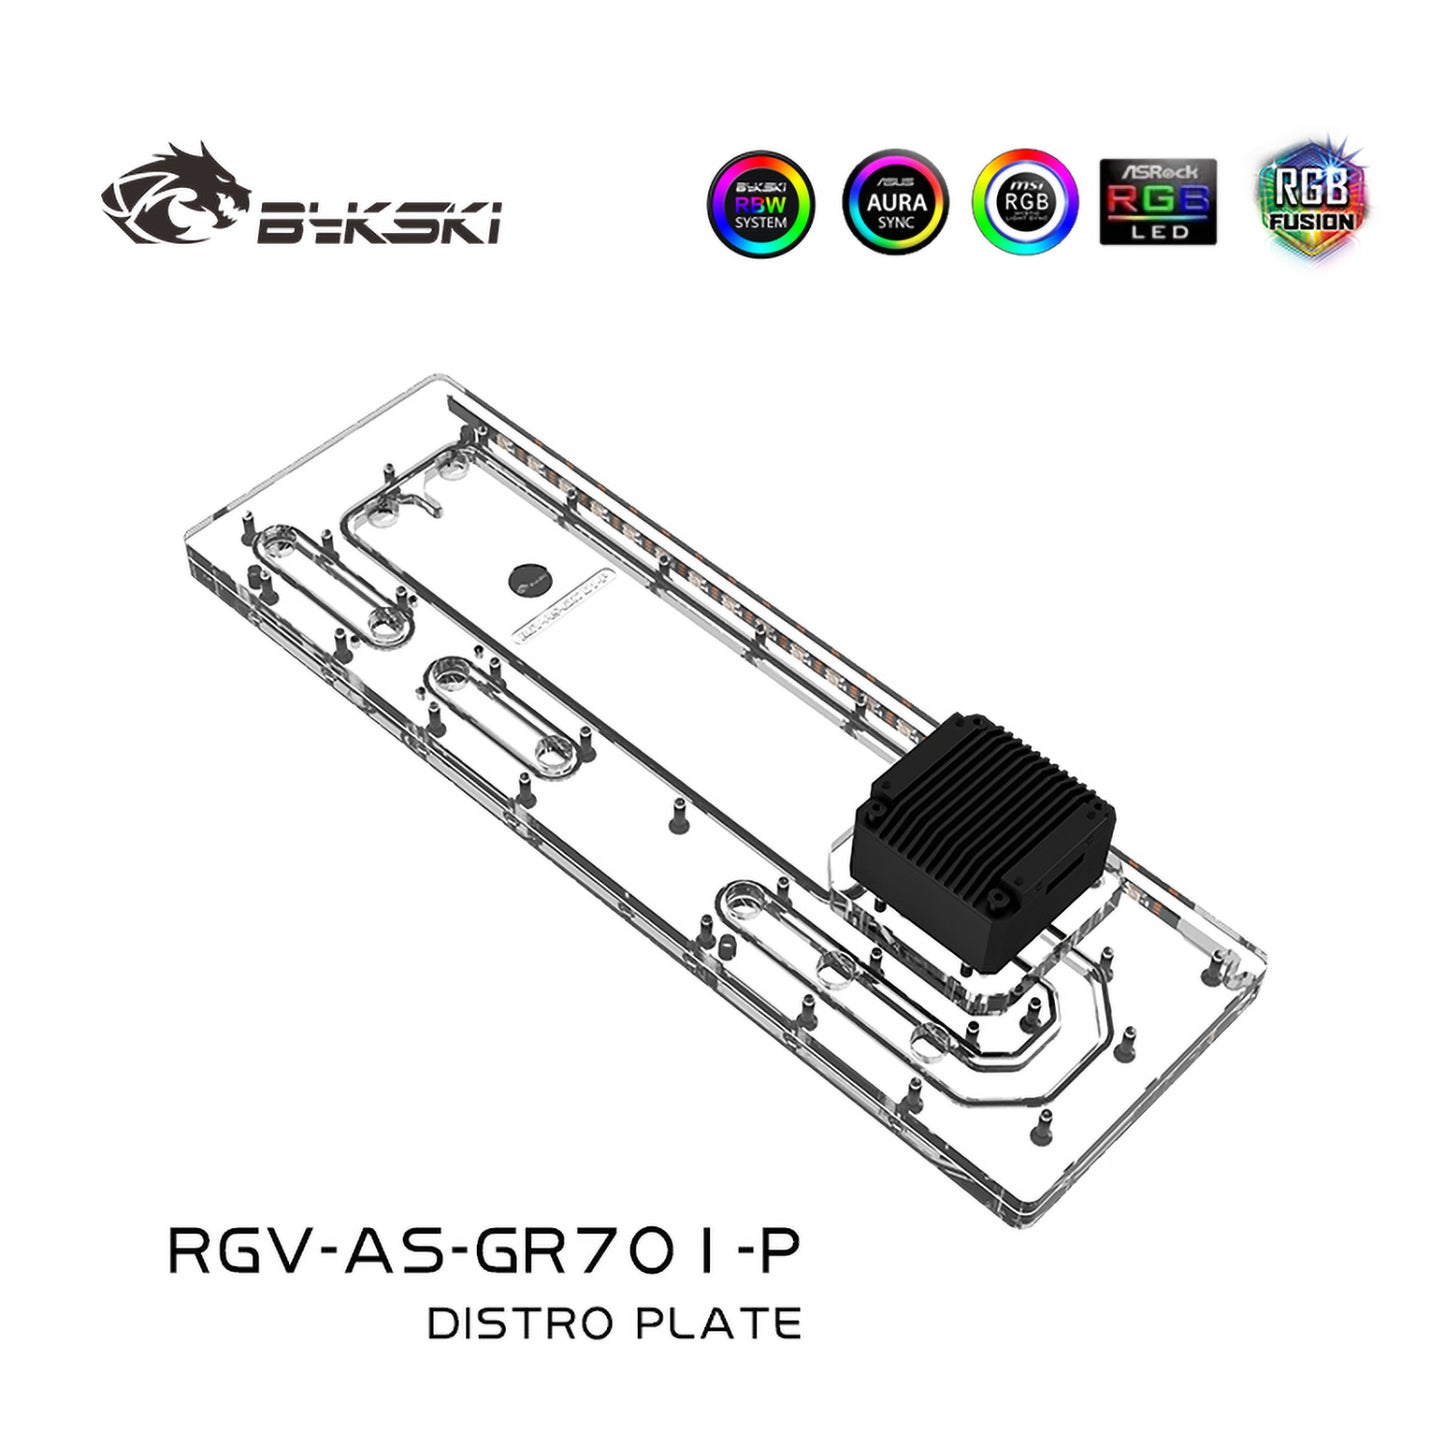 Bykski Distro Plate Kit For Asus GR701 Case, 5V A-RGB Complete Loop For Single GPU PC Building, Water Cooling Waterway Board, RGV-AS-GR701-P